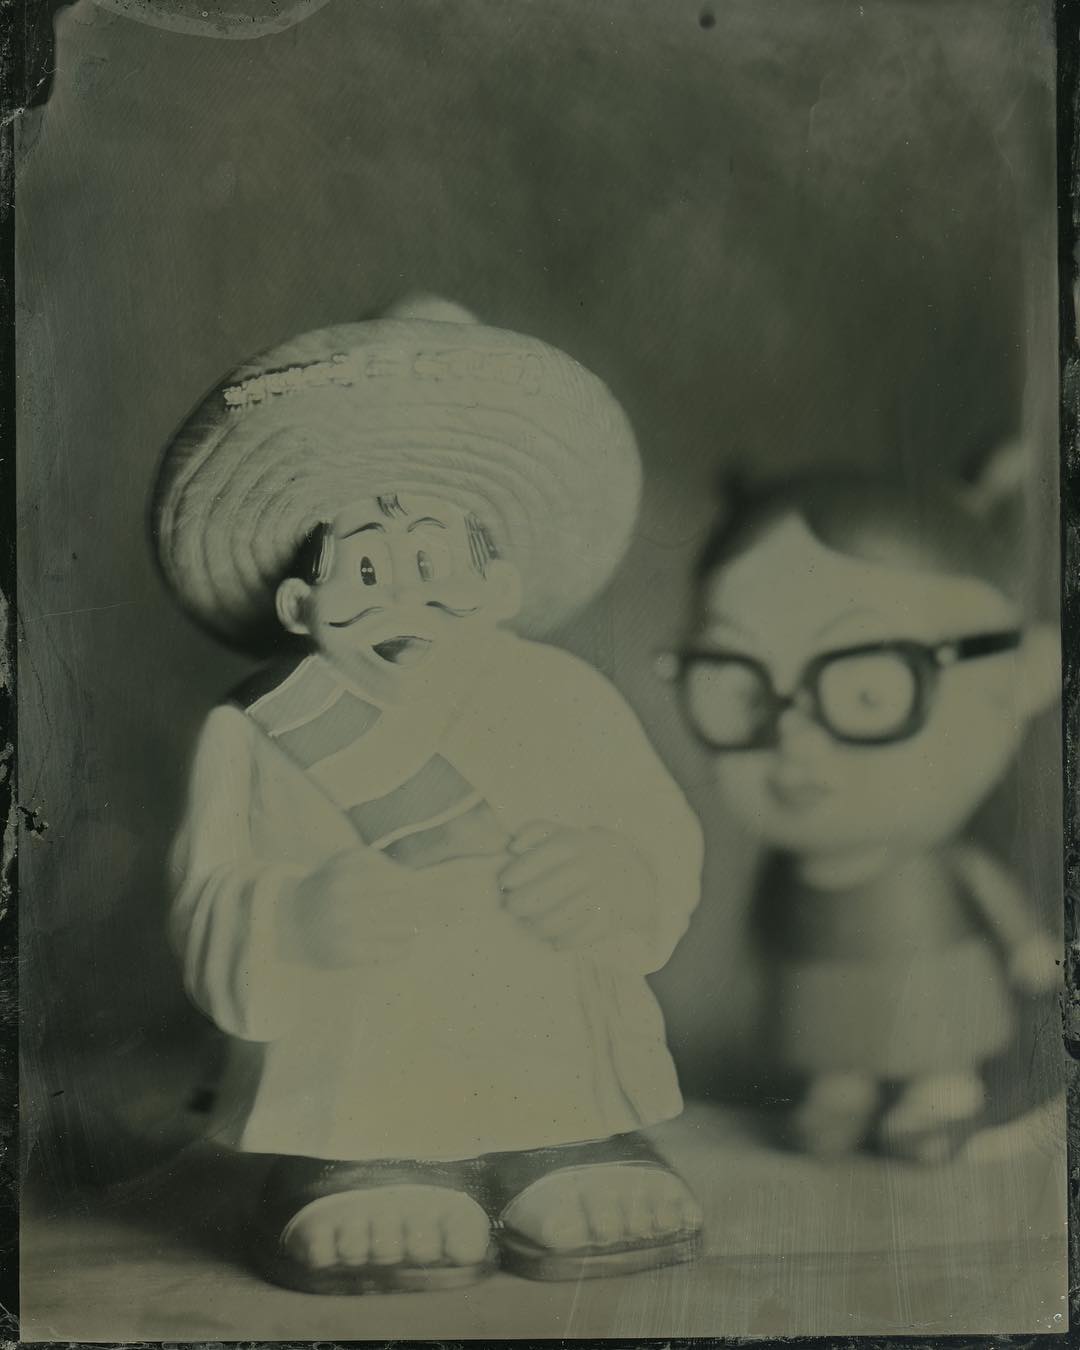 Pedro and Little Enid. 
I brought some toys to the wet plate workshop @penumbrafoundation taught by the amazing @elmalayheehoo to use for still lifes. This one features the mascot of everyoneâs favorite racist tourist trap, South of the Border, and the main character from the movie and graphic novel Ghost World. #tintype #wetplate #wetplatecollodion #makeyourownfilm  #largeformat #4x5